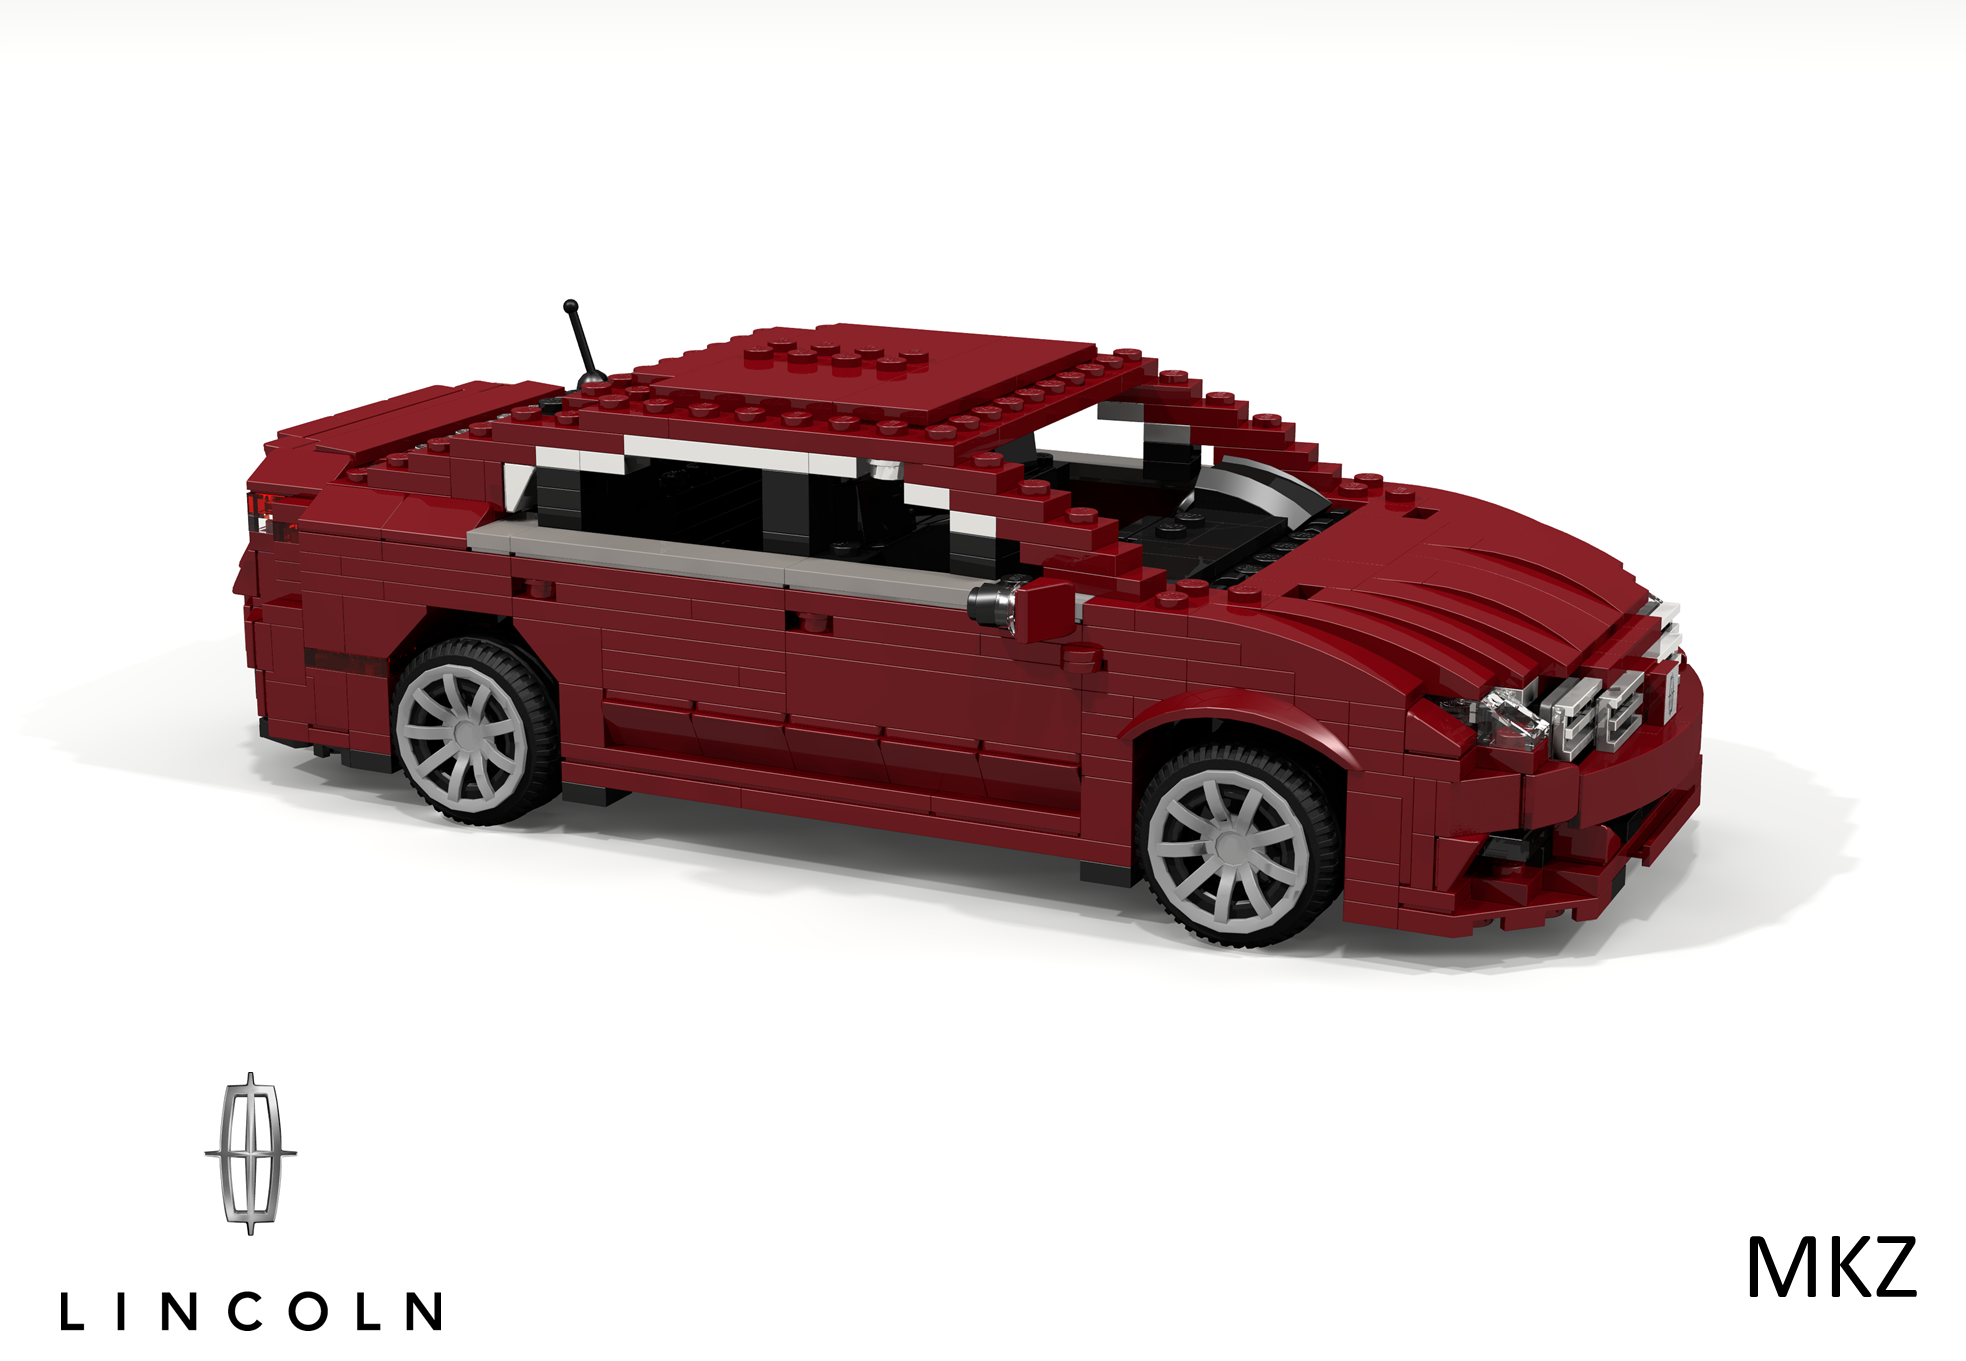 2013_lincoln_mkz_cd533_saloon.png